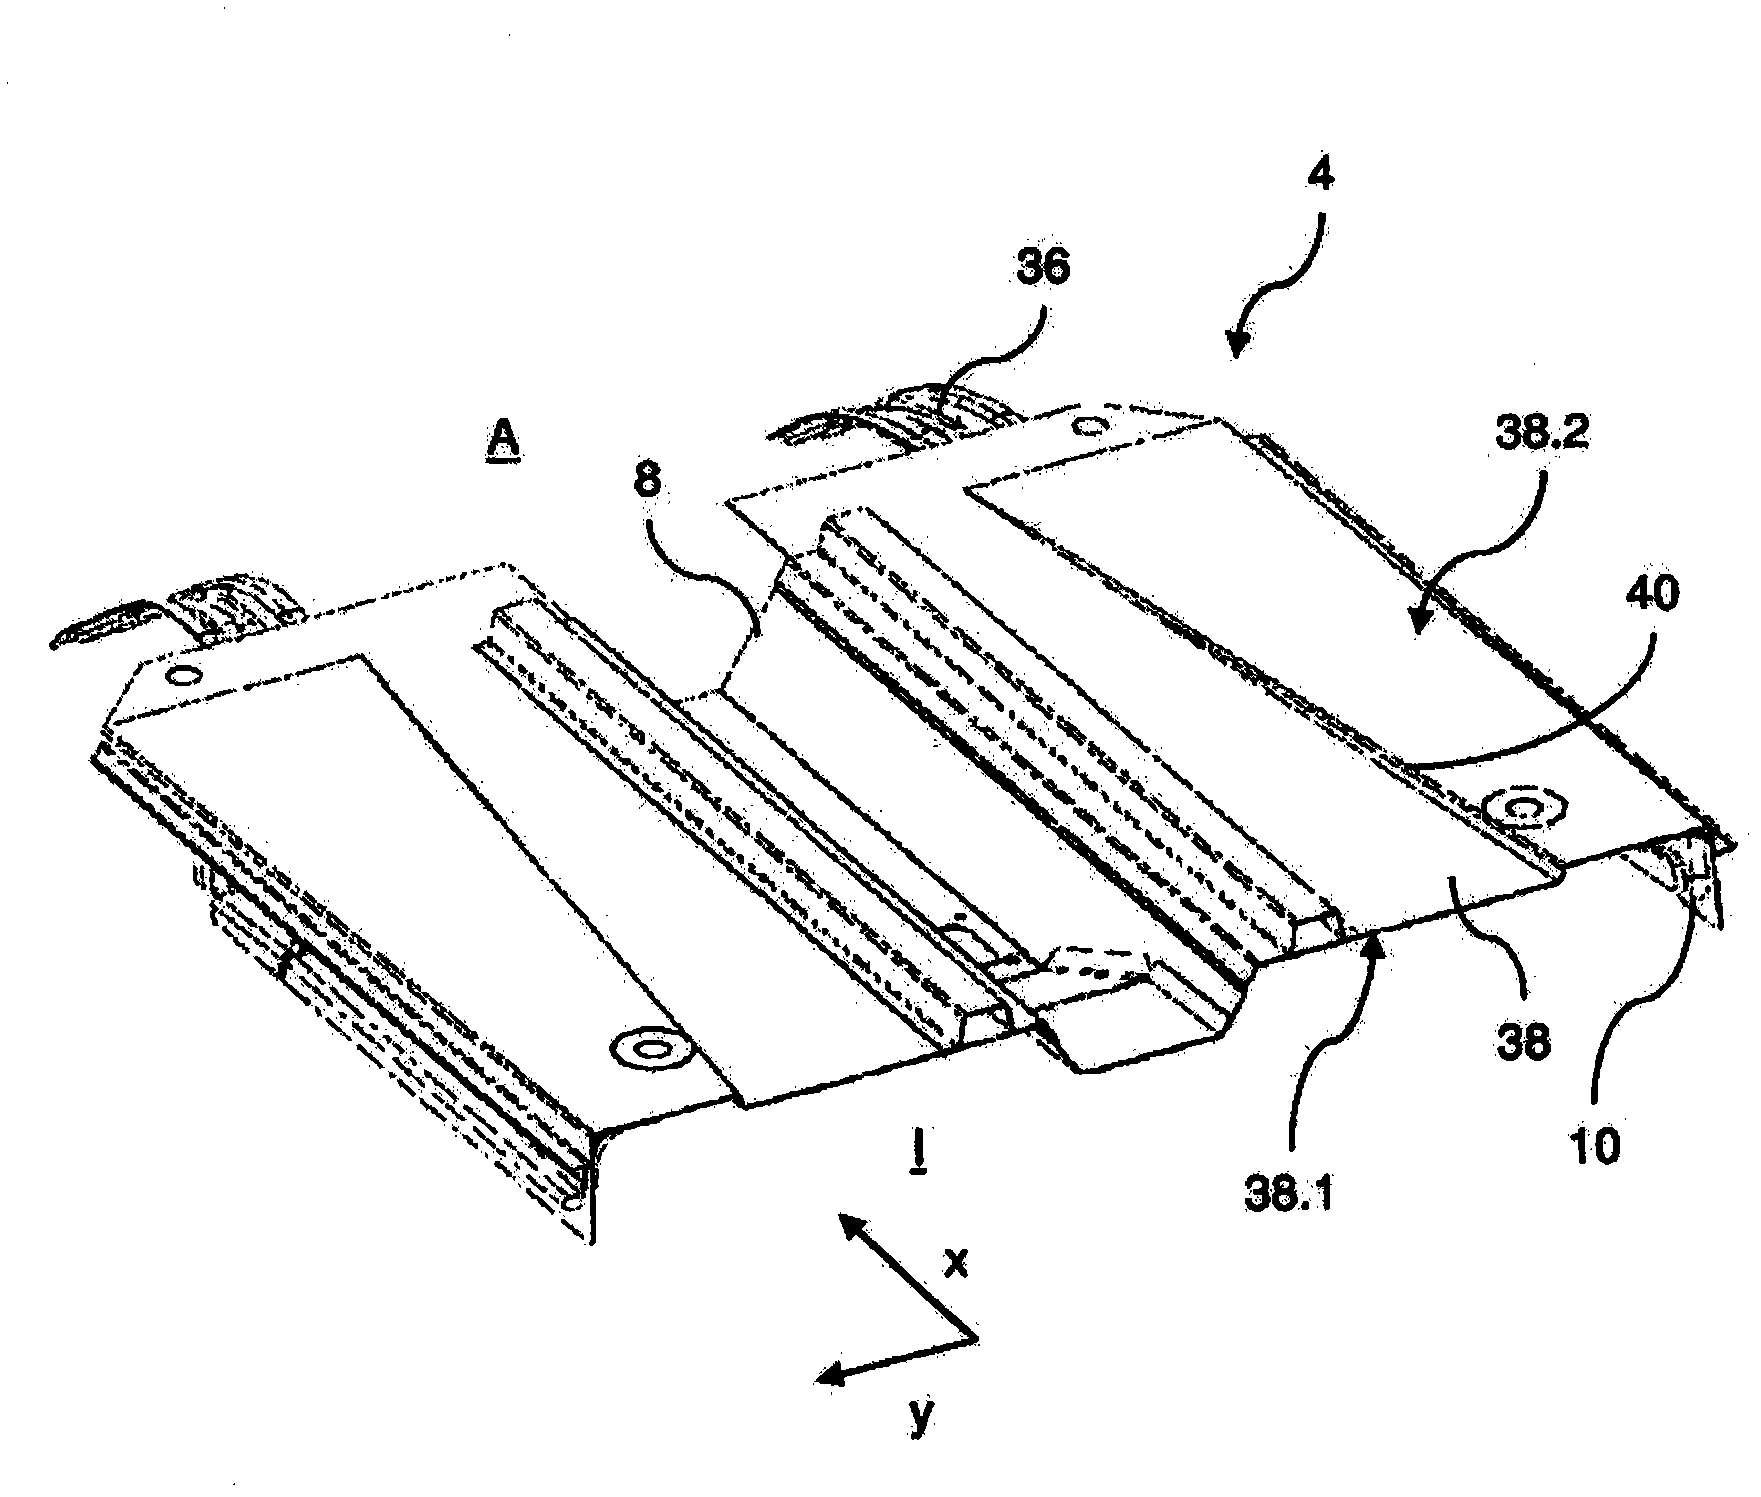 Body structure of a motor vehicle, motor vehicle and method of manufacturing a body structure